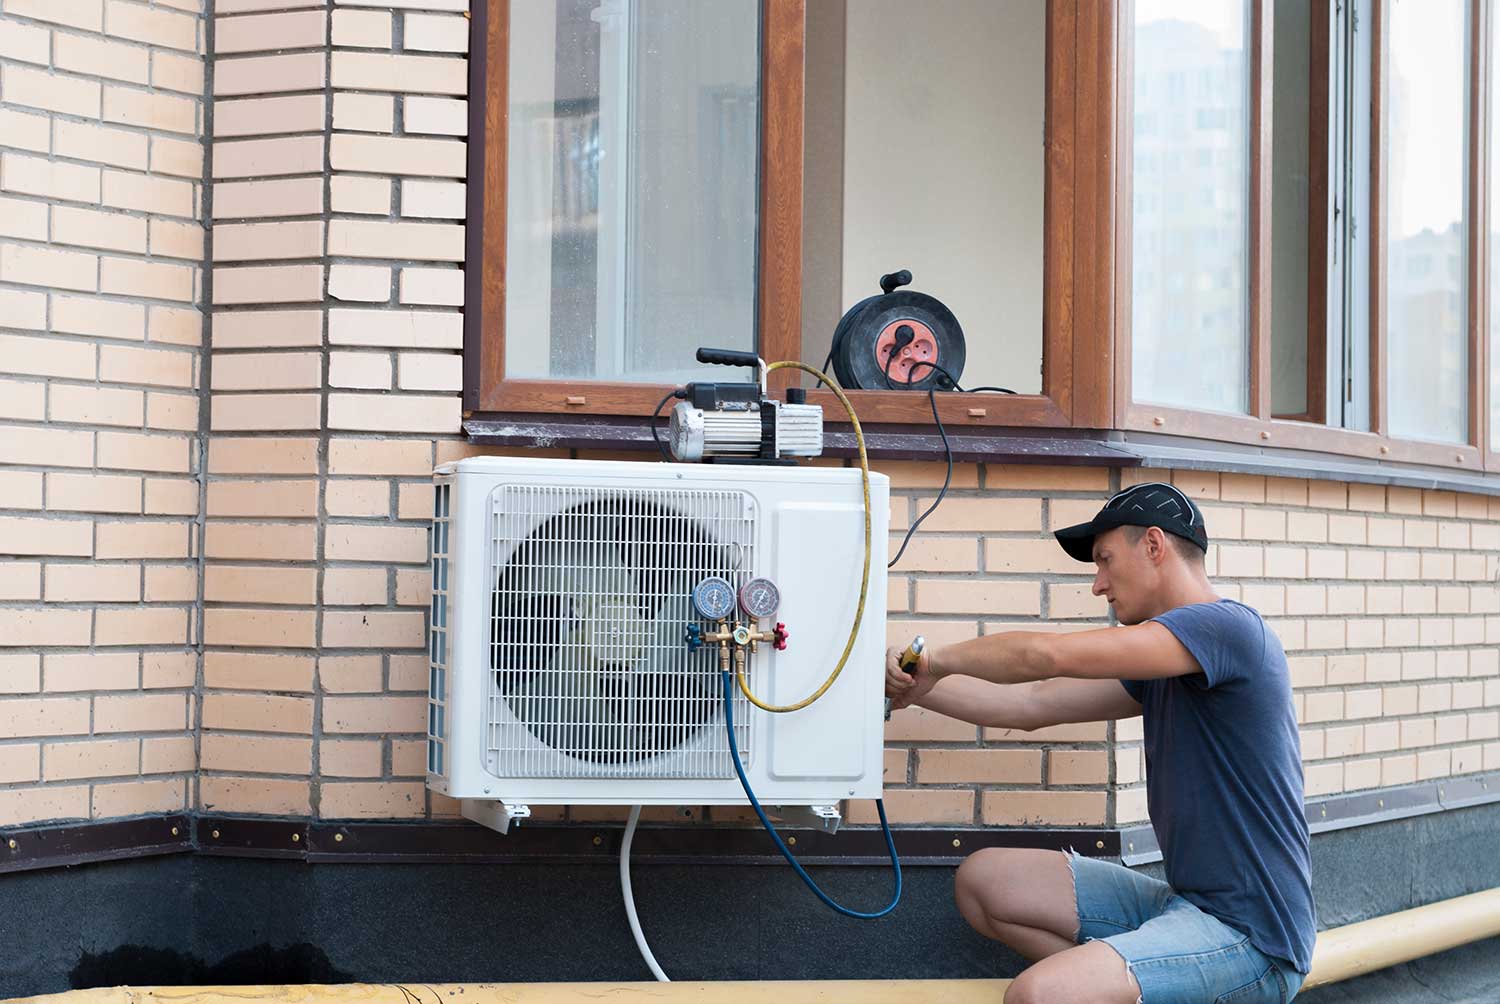 My friend works as an air conditioning system replacement specialist in Palm Bay FL